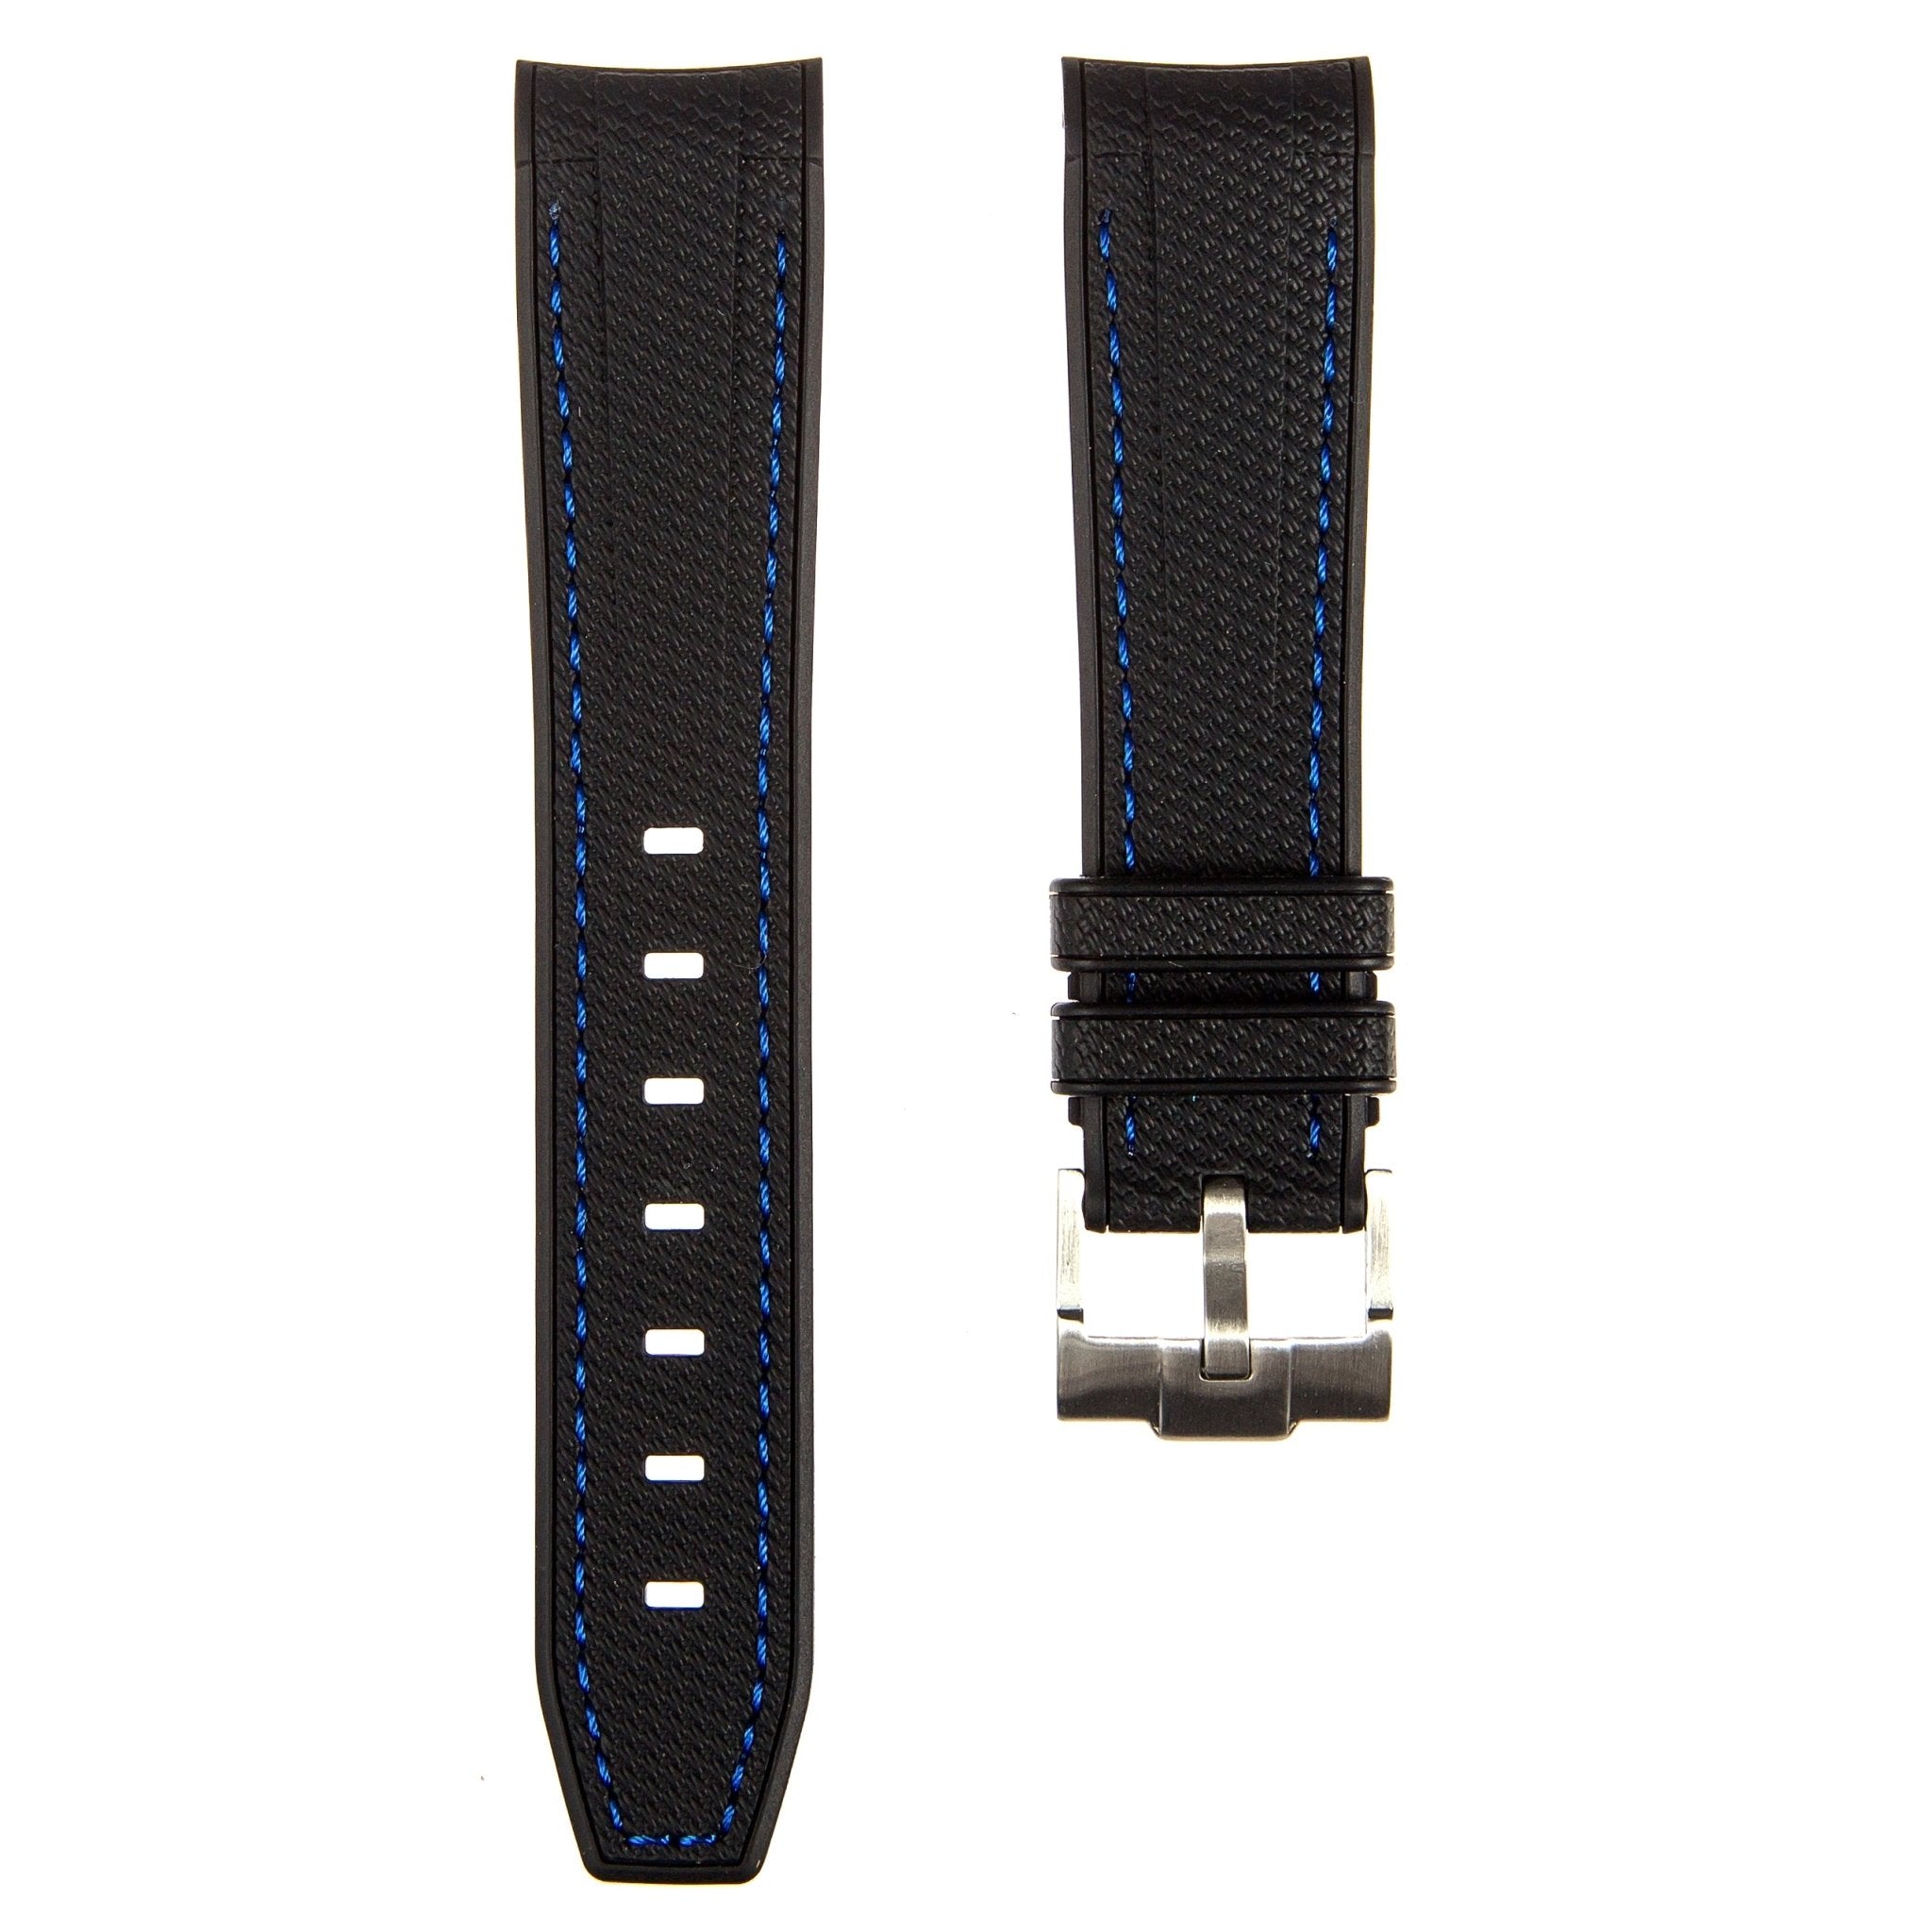 Textured Curved End Premium Silicone Strap – Compatible with Rolex Submariner – Black with Blue Stitch (2405) -StrapSeeker